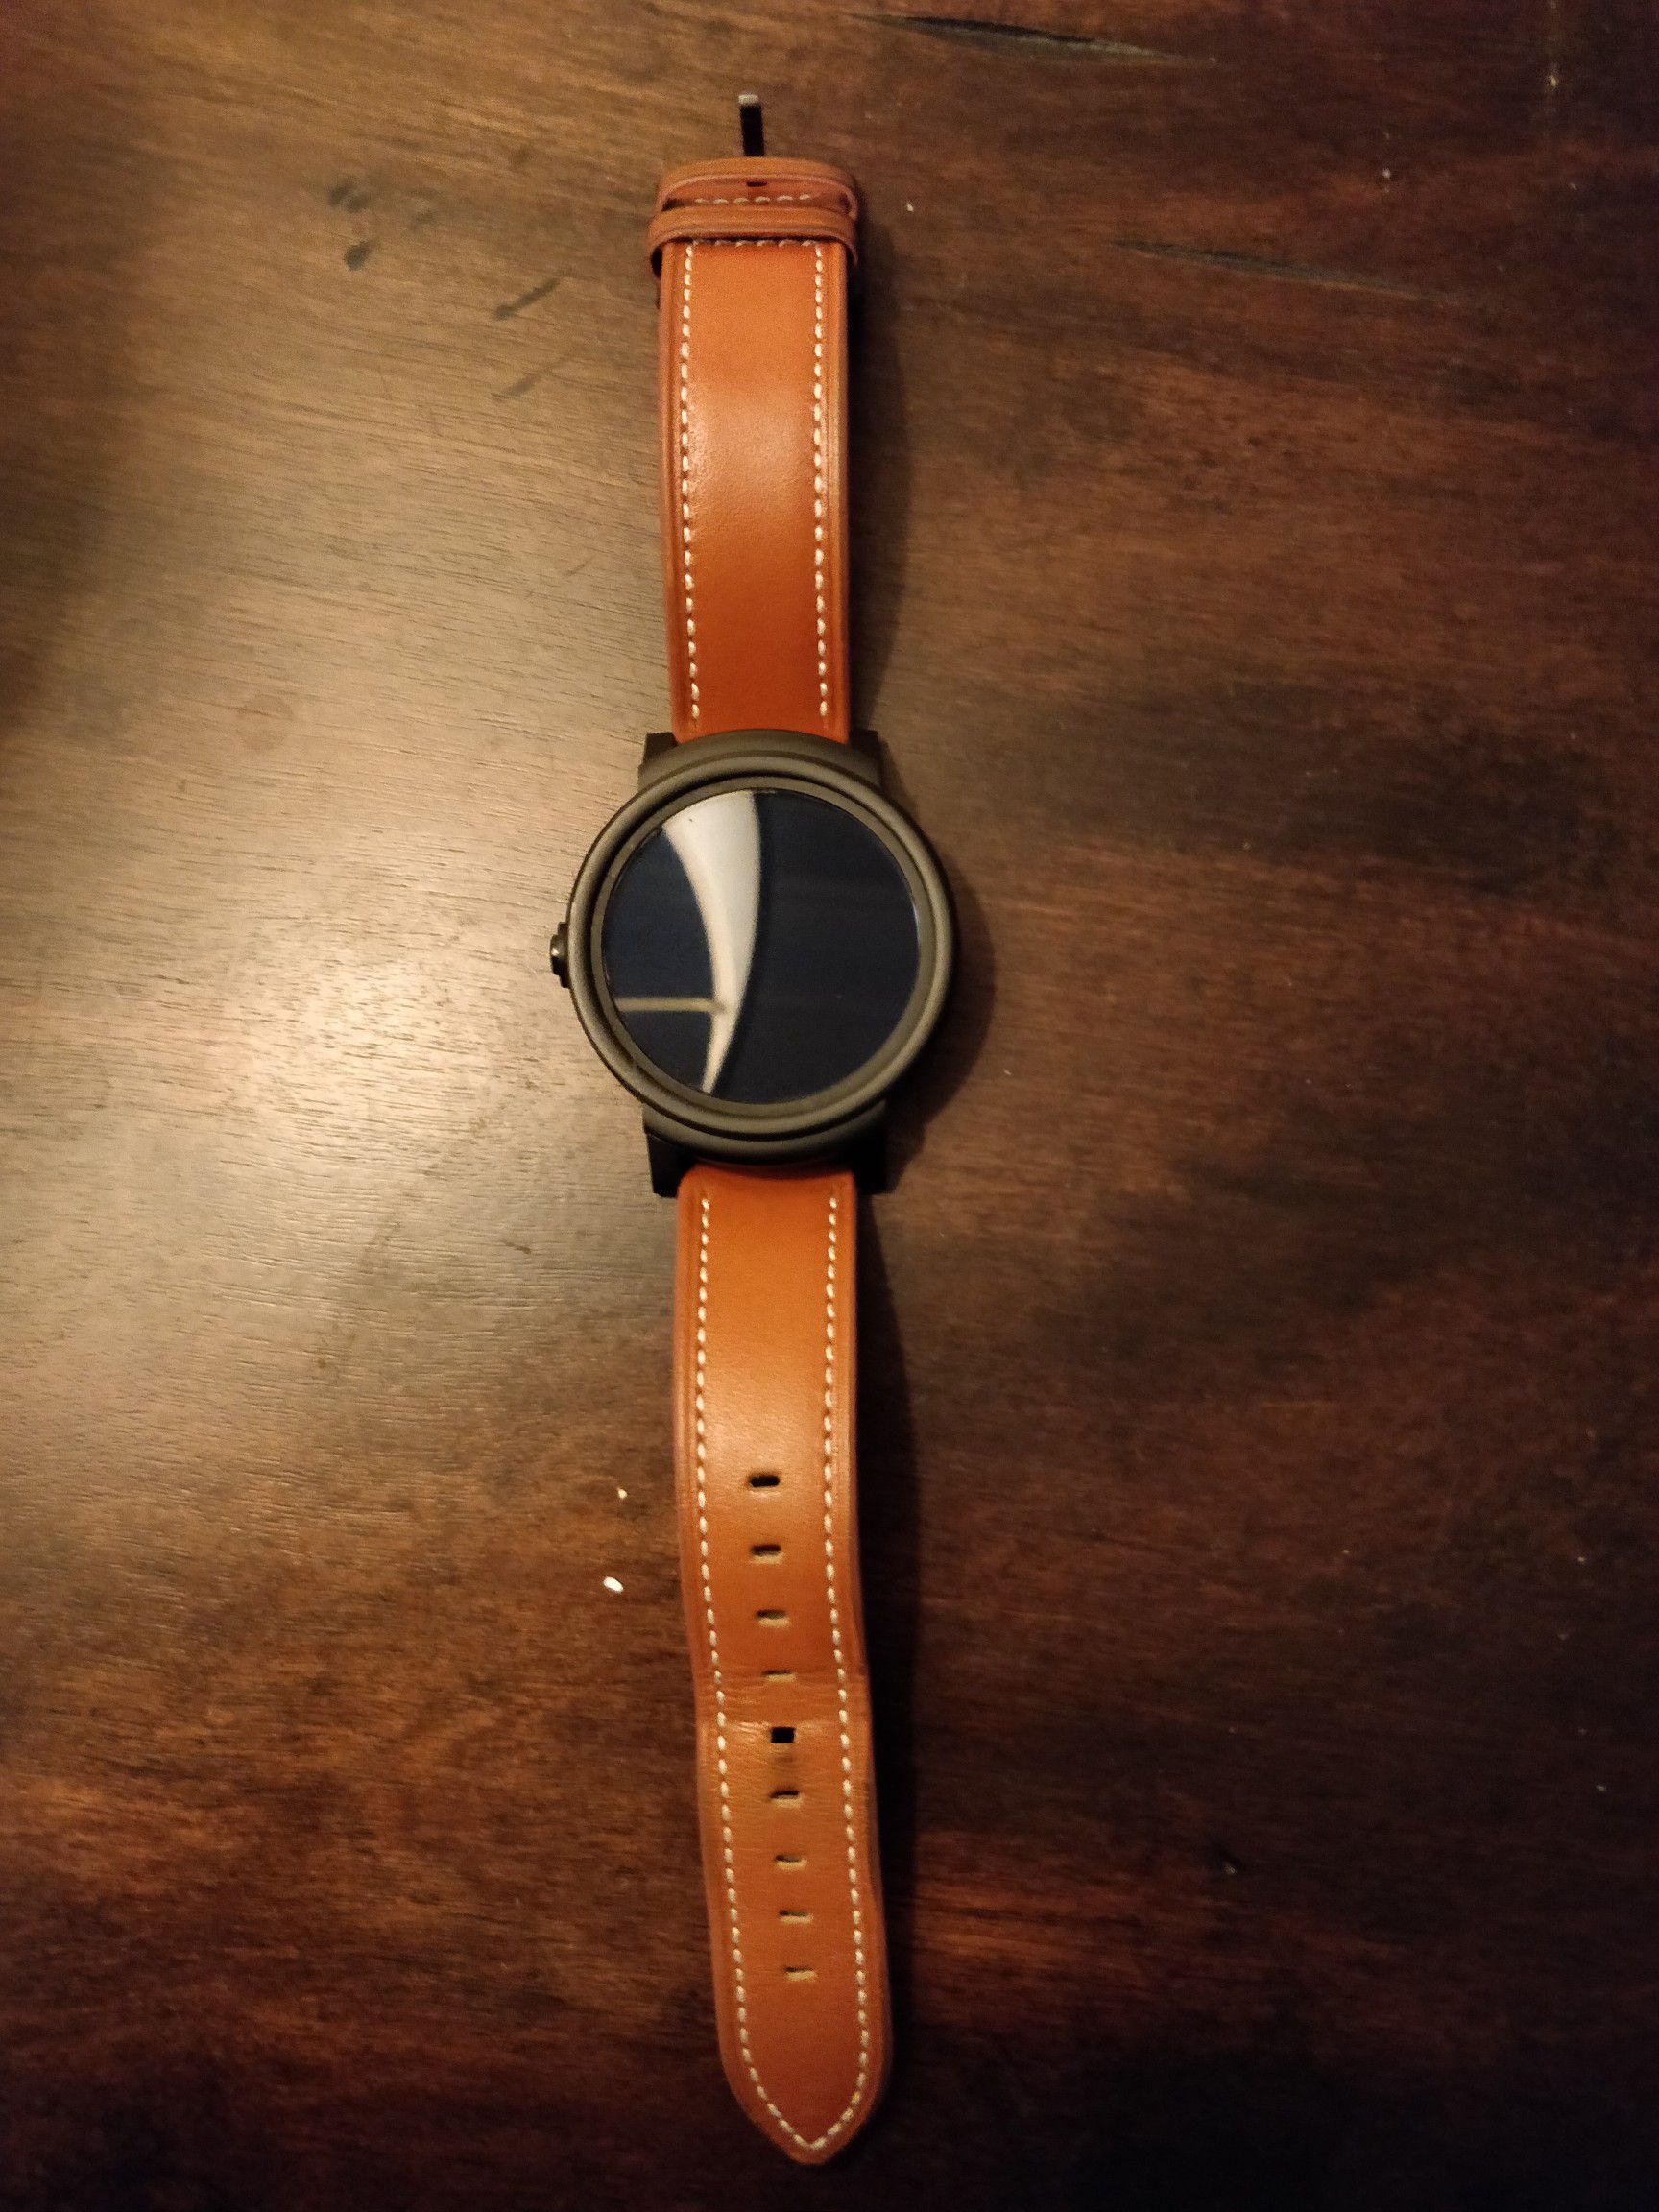 Android Wear Ticwatch E by Mobvoi